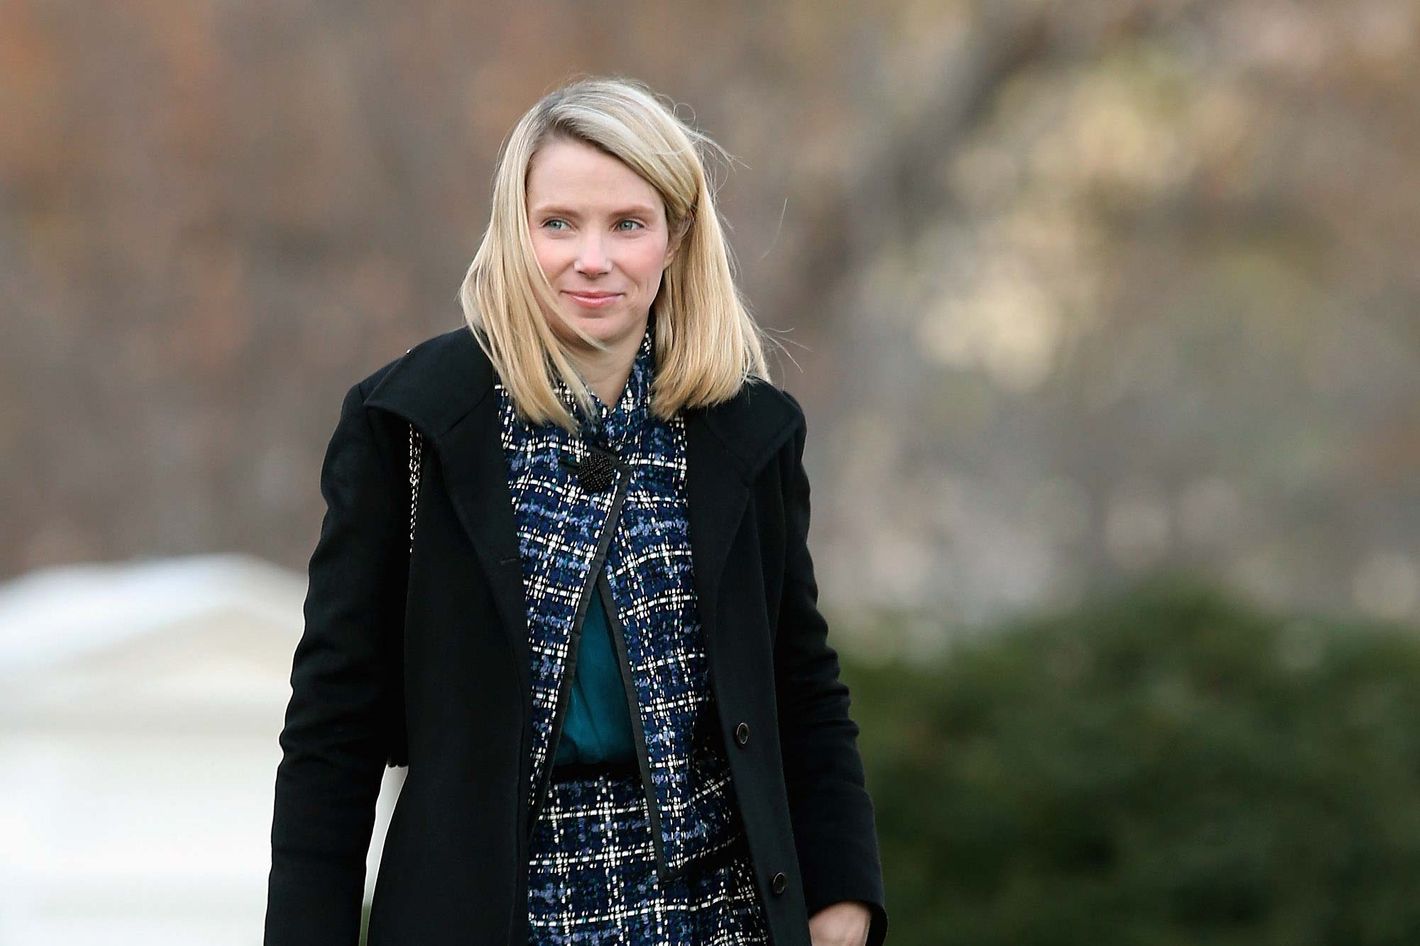 Marissa Mayer and telecommuting: Yahoo CEO got it right - The